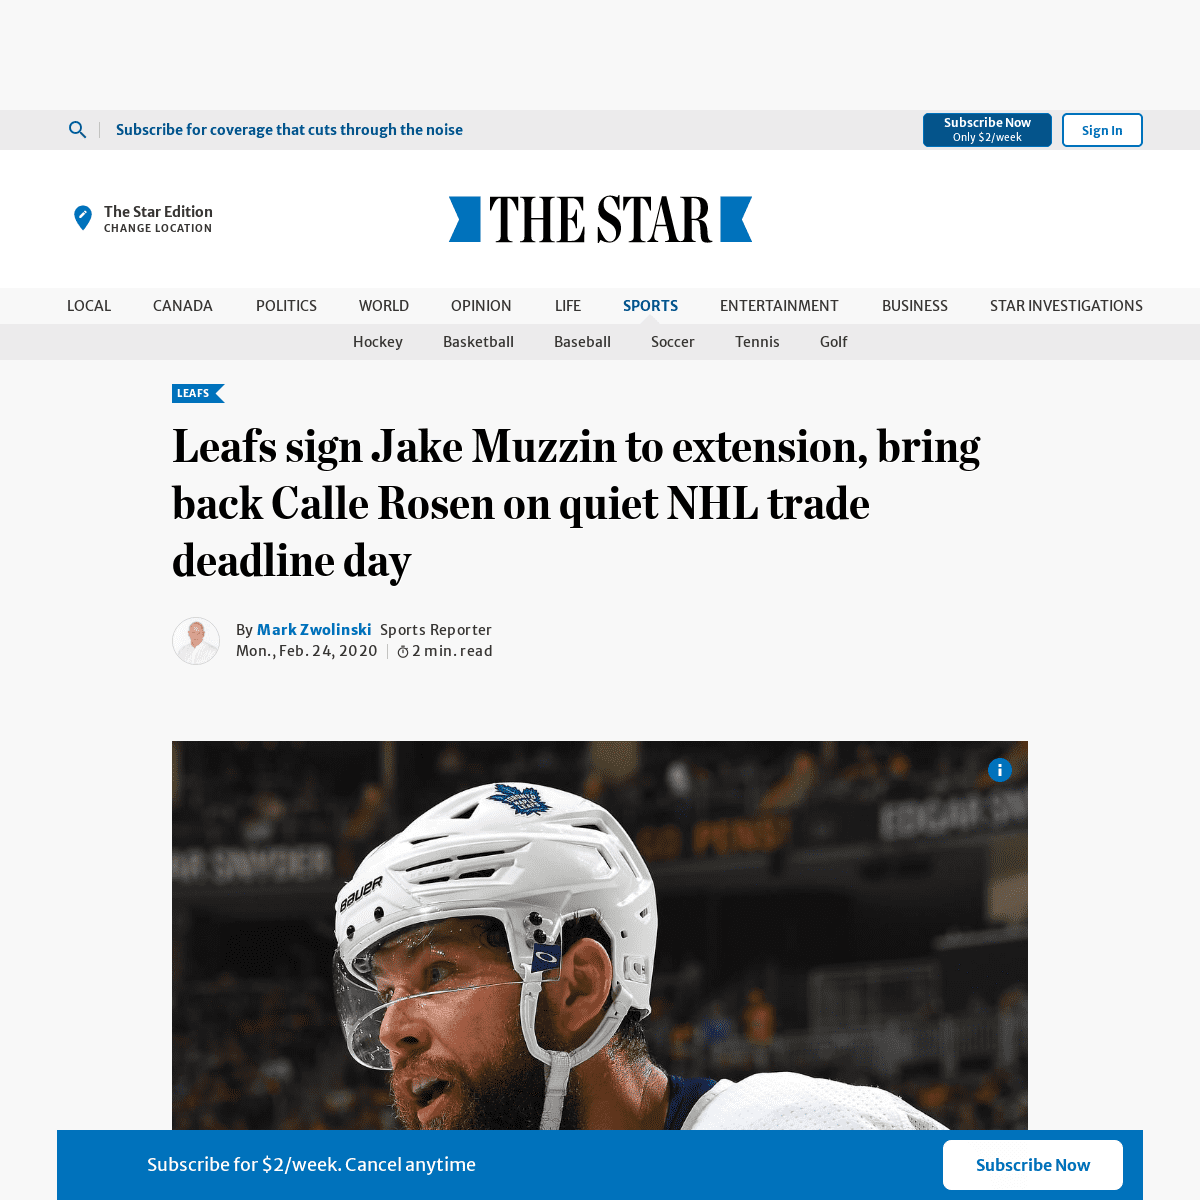 A complete backup of www.thestar.com/sports/leafs/2020/02/24/leafs-reacquire-defenceman-calle-rosen-in-nhl-trade-deadline-day-sw